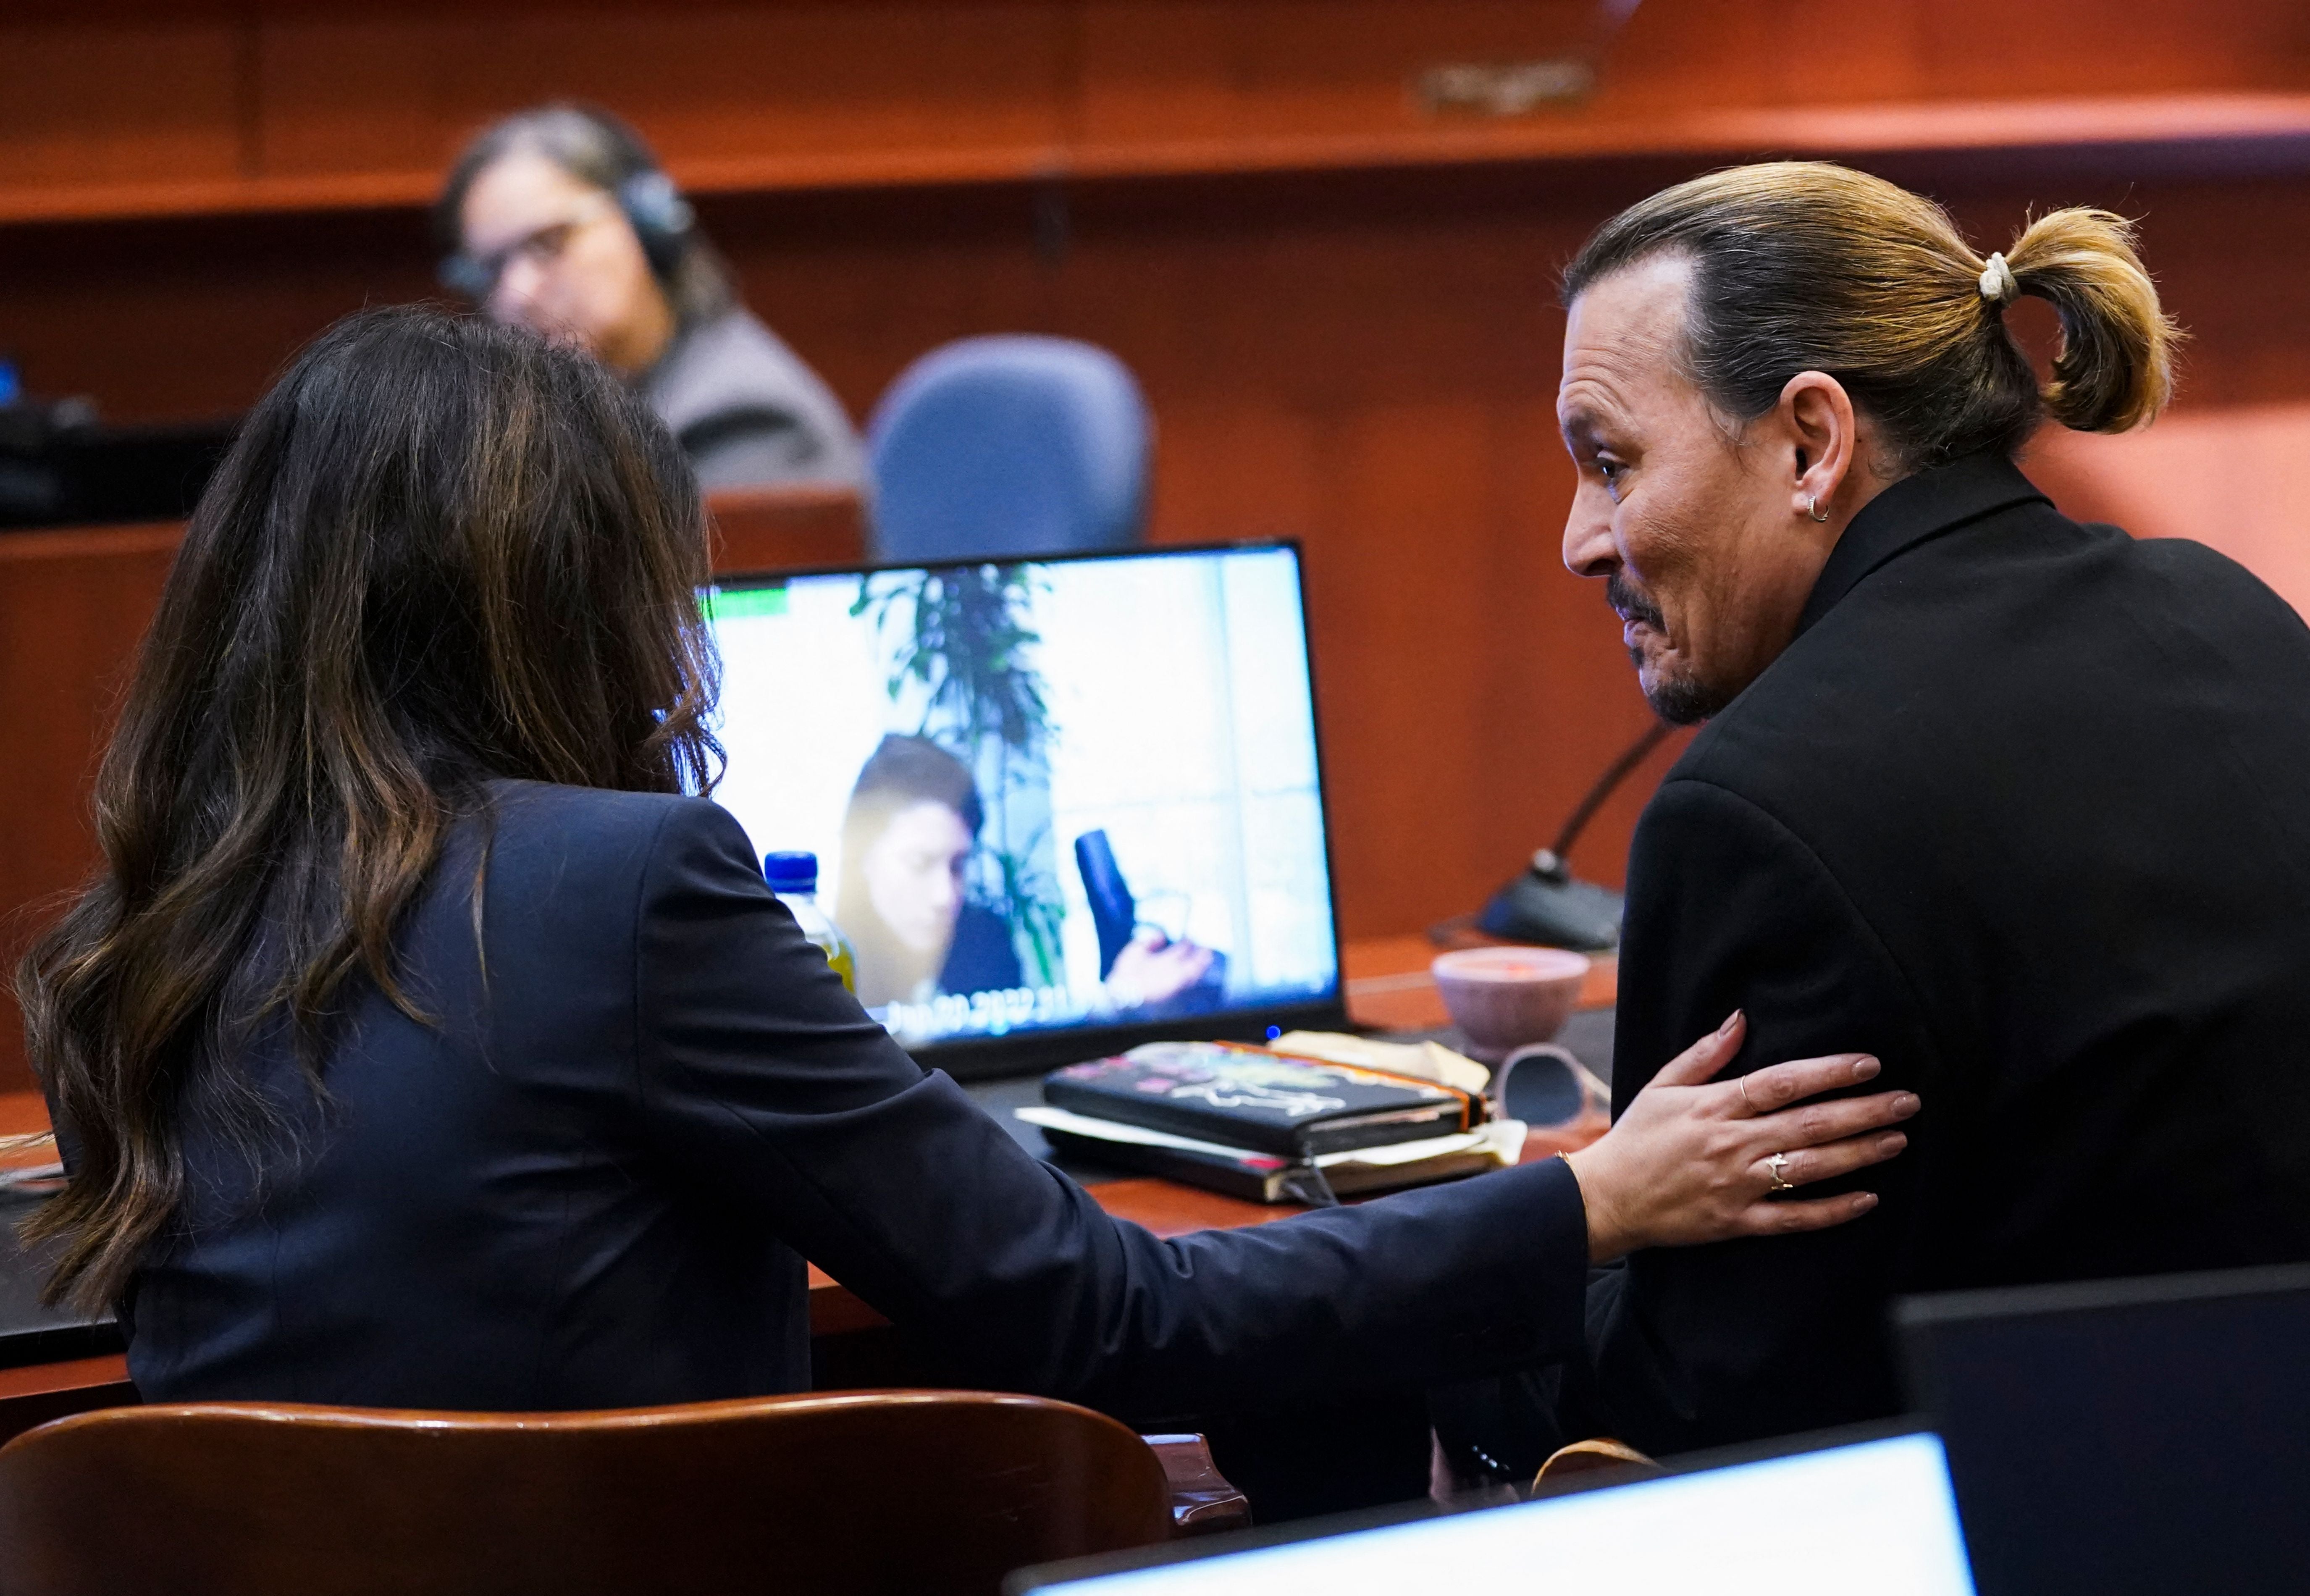 Johnny Depp and Camille Vasquez at the Fairfax County Courthouse in Fairfax, Virginia, on 18 May 2022